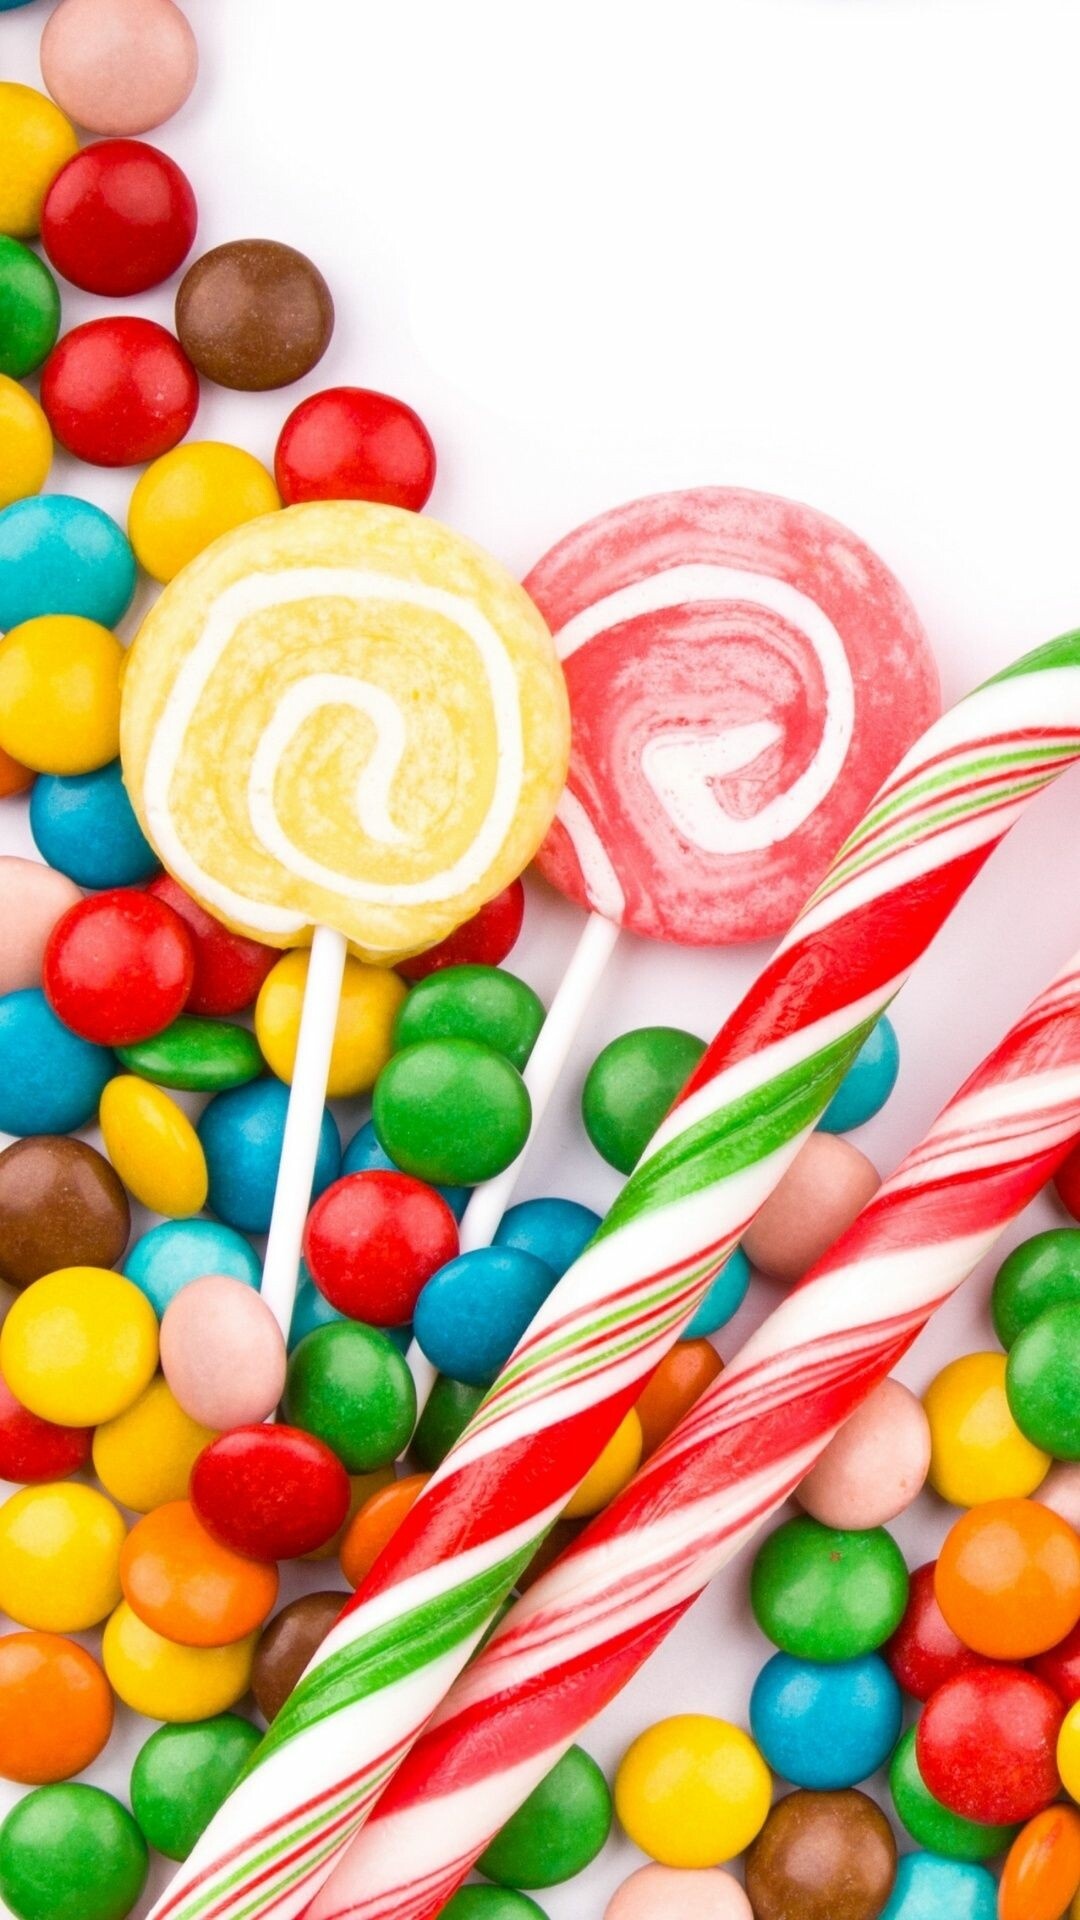 Colorful candy wallpapers, Sweet and vibrant, Eye-catching designs, Sugary cravings, 1080x1920 Full HD Phone